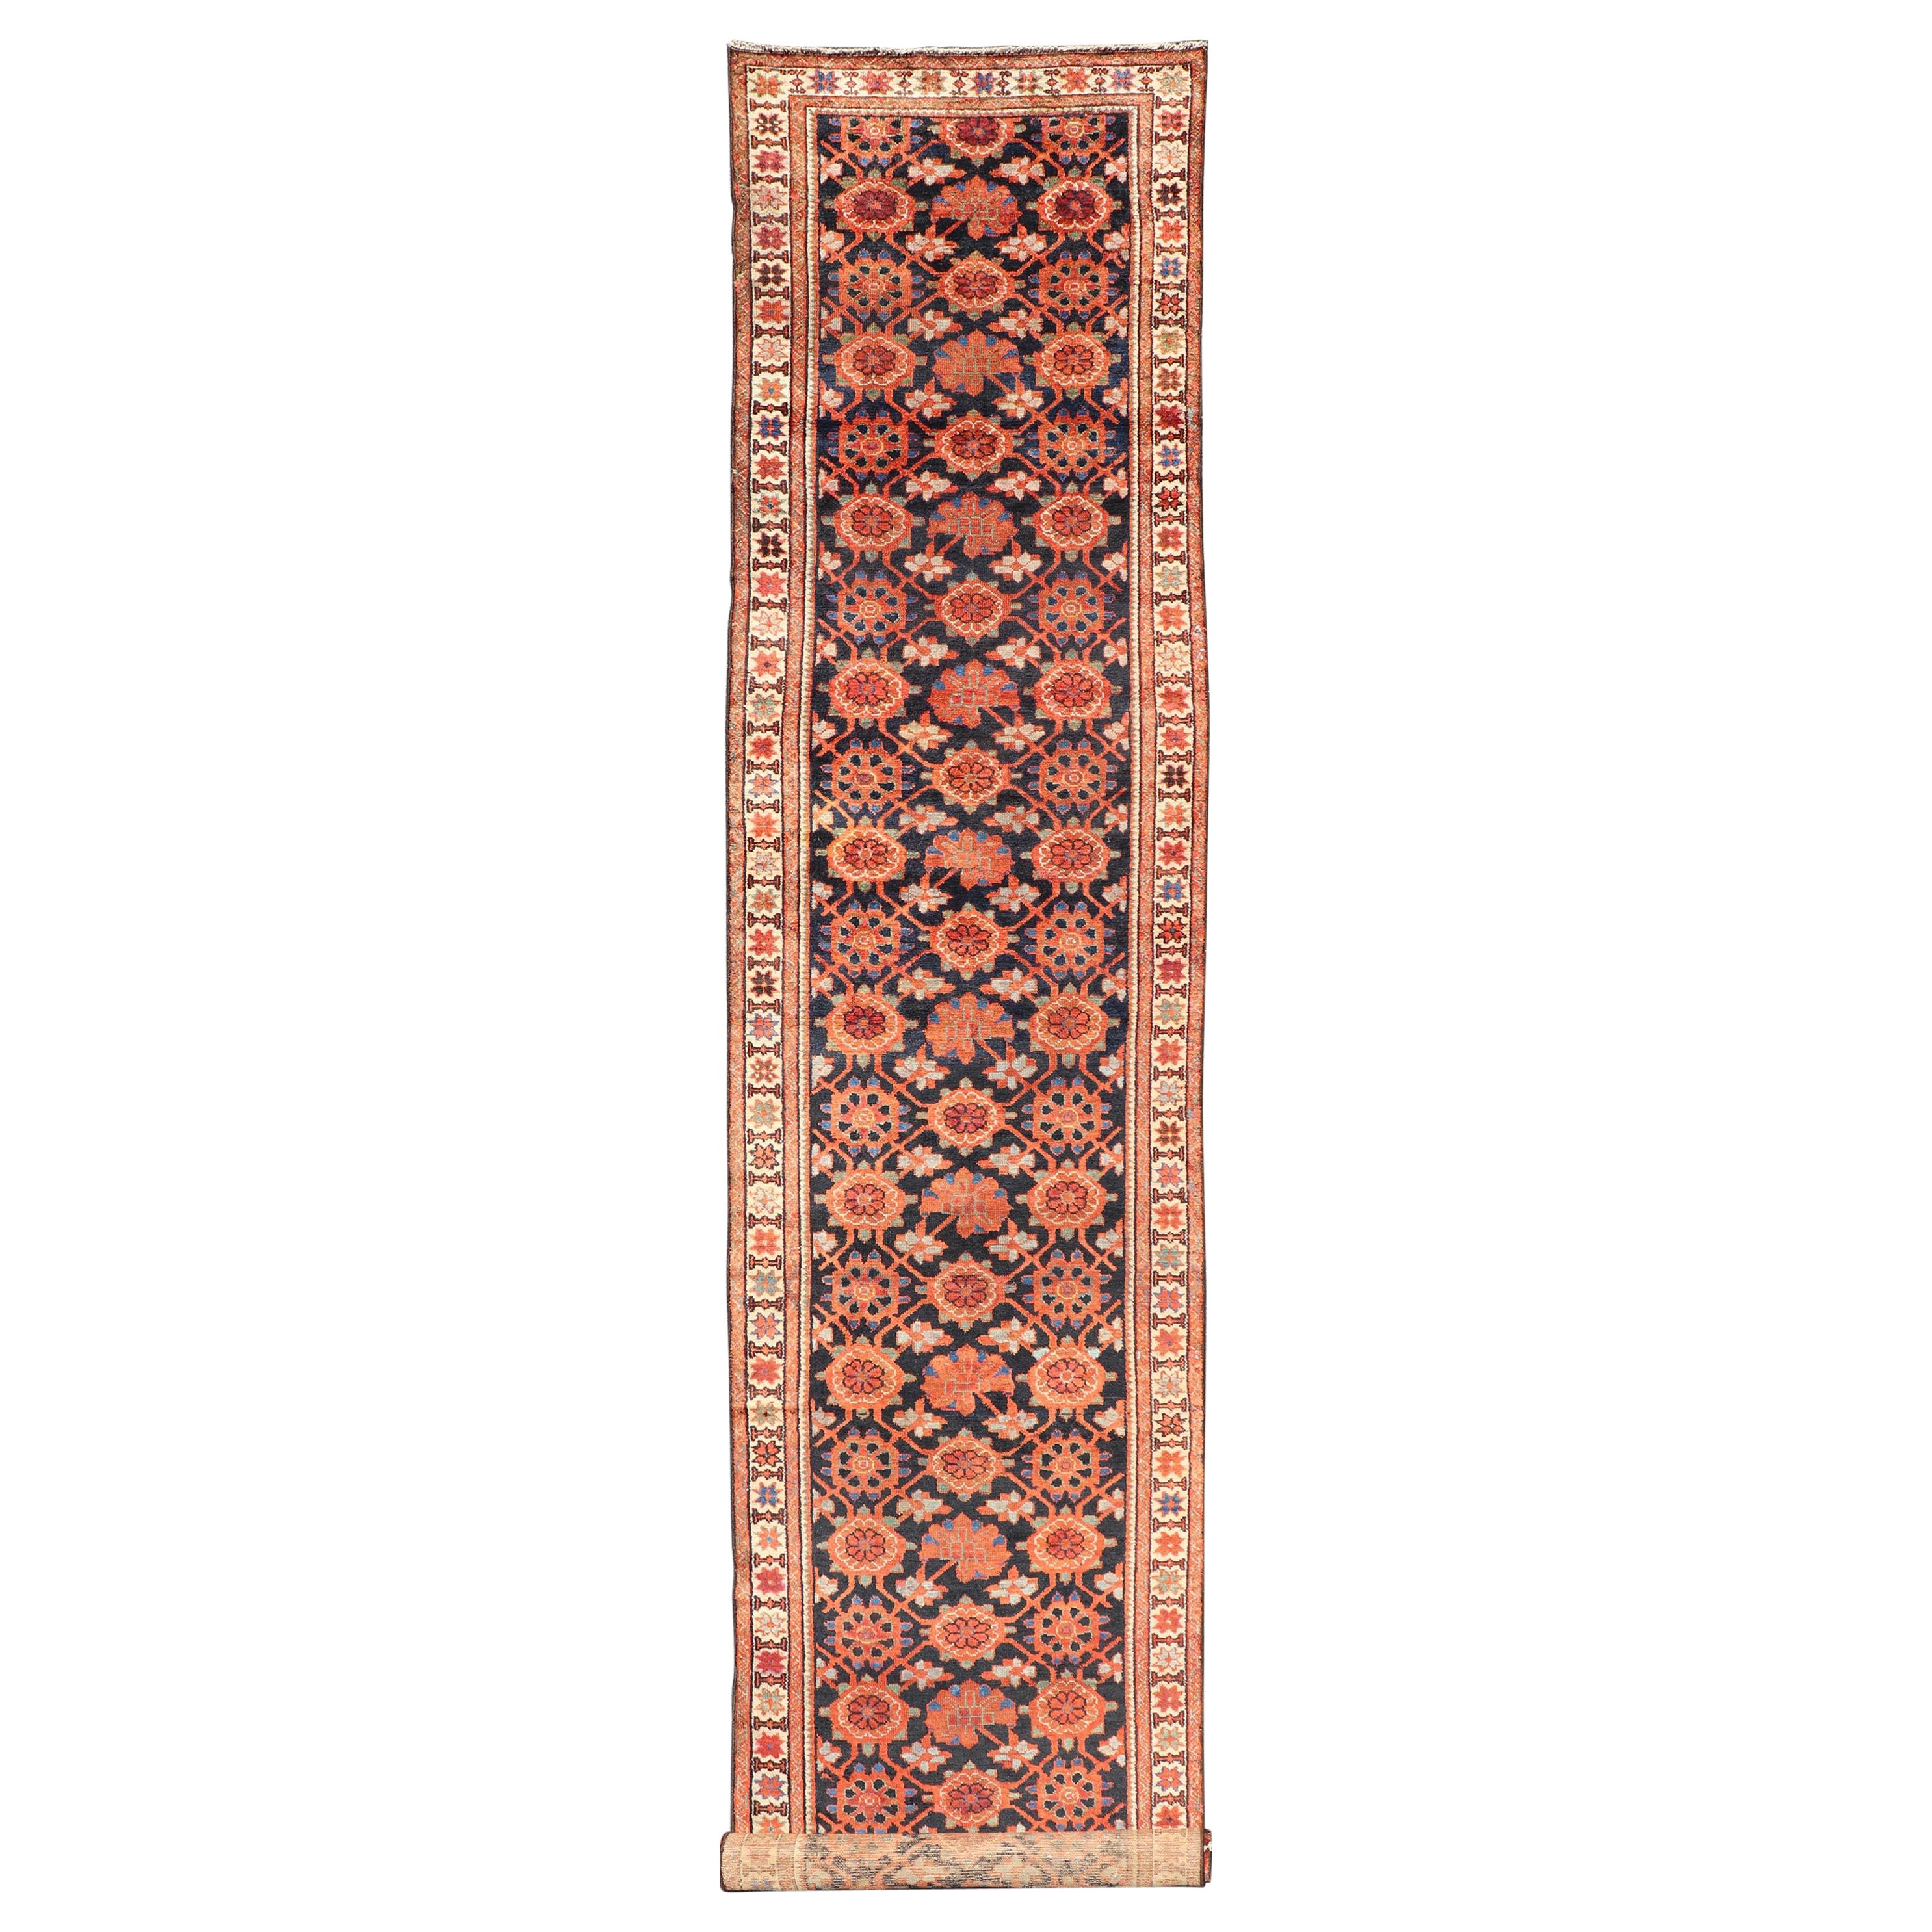 Antique Persian Malayer Runner with Reds and Oranges on a Charcoal Background